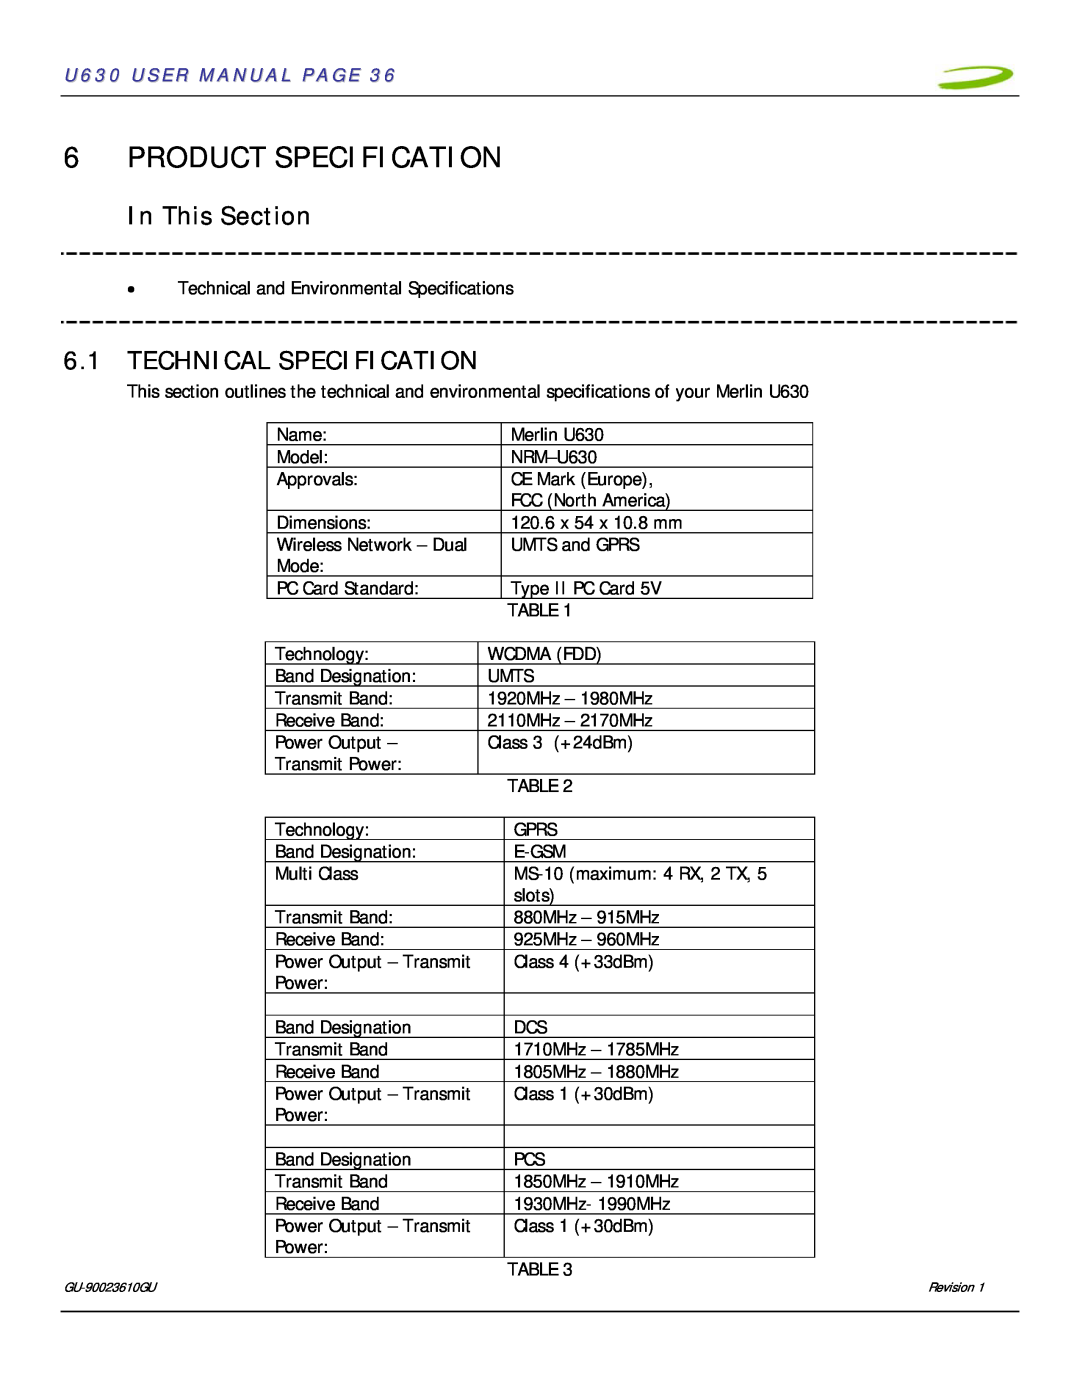 InFocus user manual Product Specification, Technical Specification, In This Section, U630 USER MANUAL PAGE 